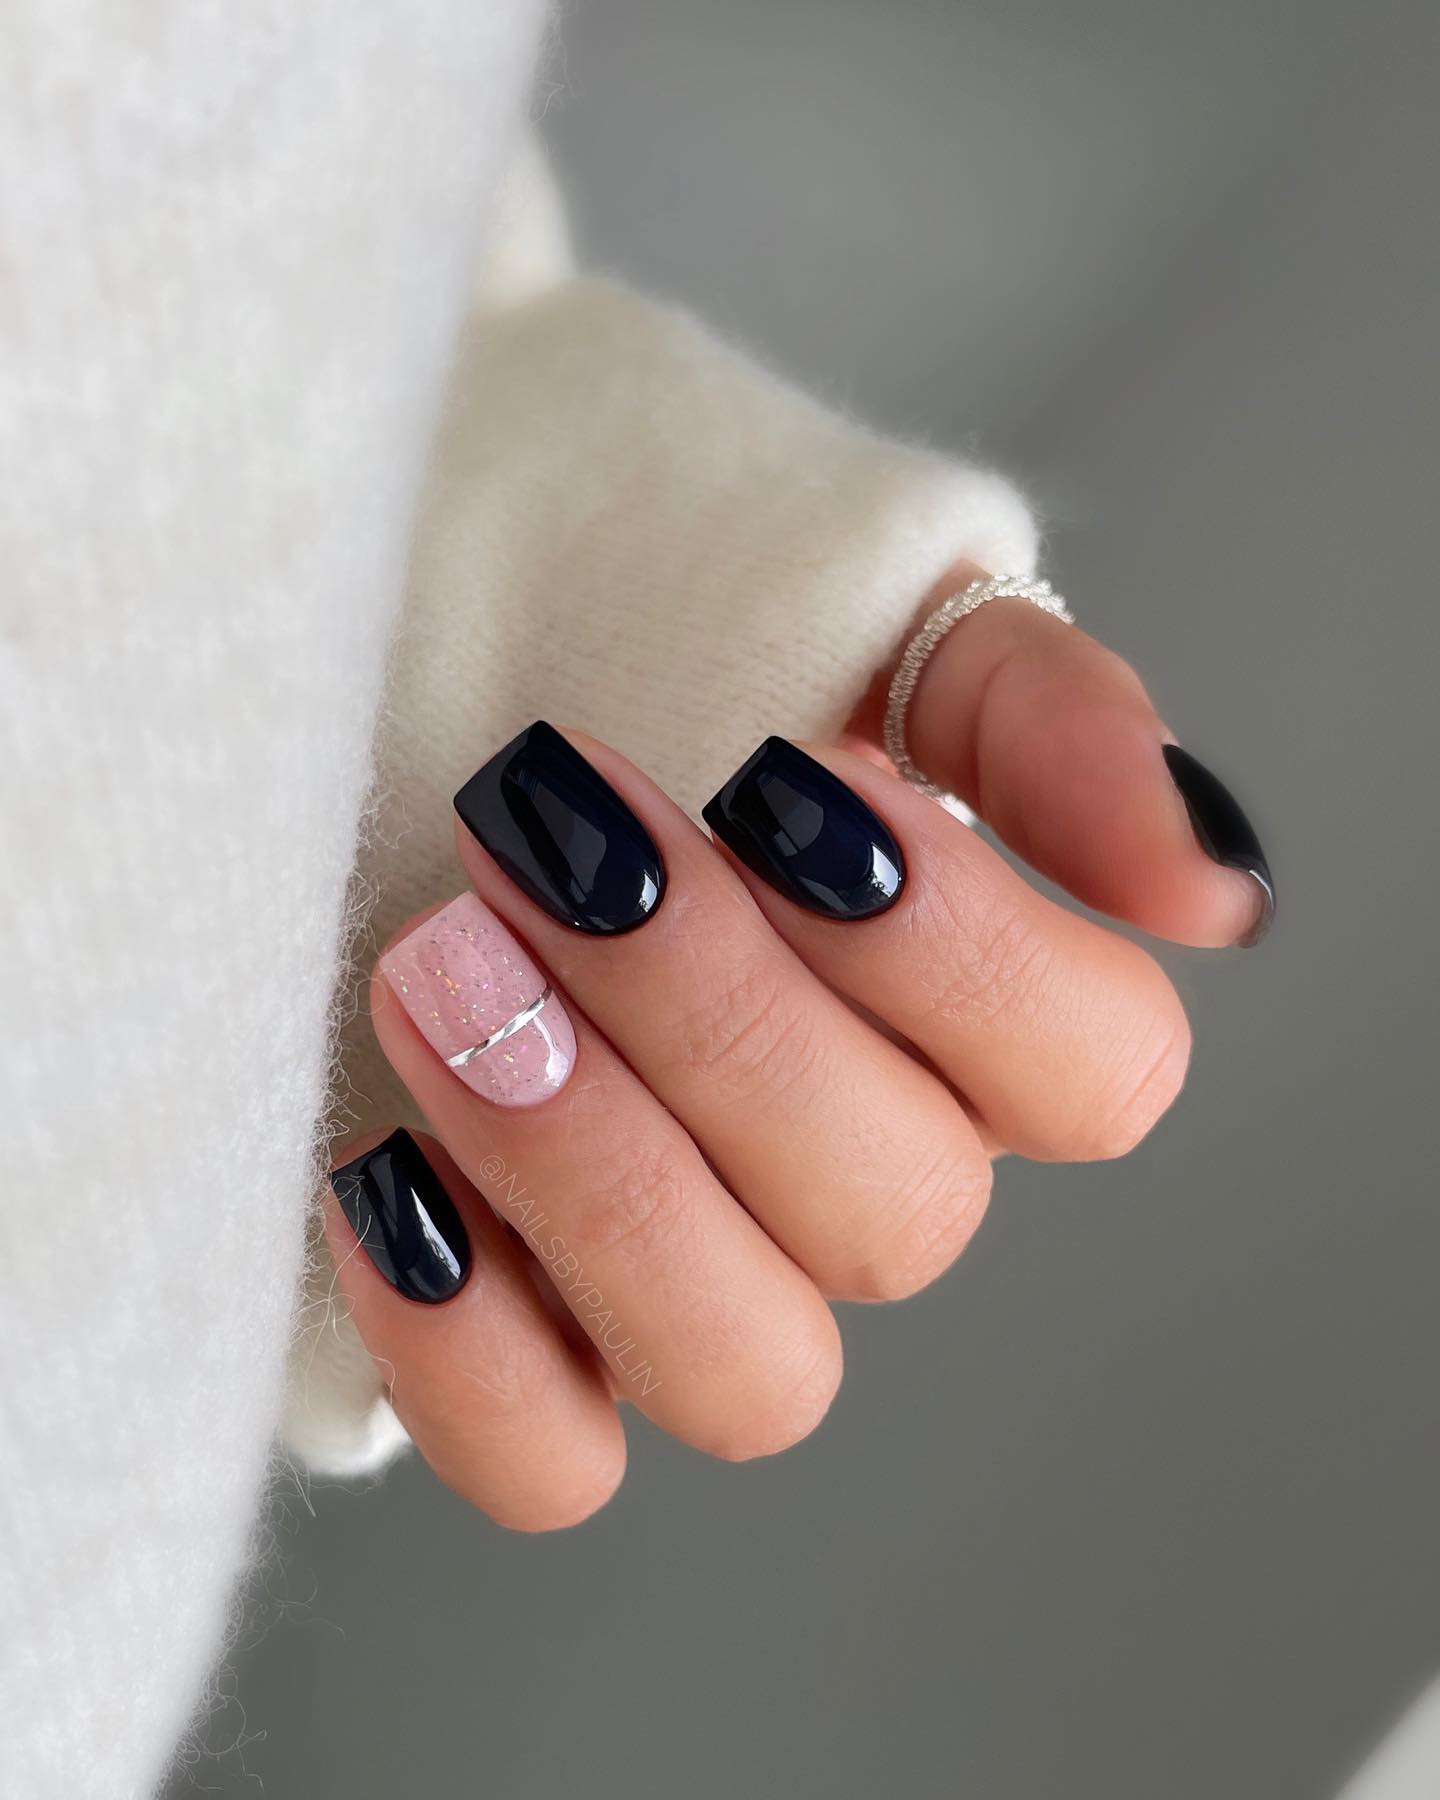 You are currently viewing Edgy Black Nail Designs to Try This Christmas